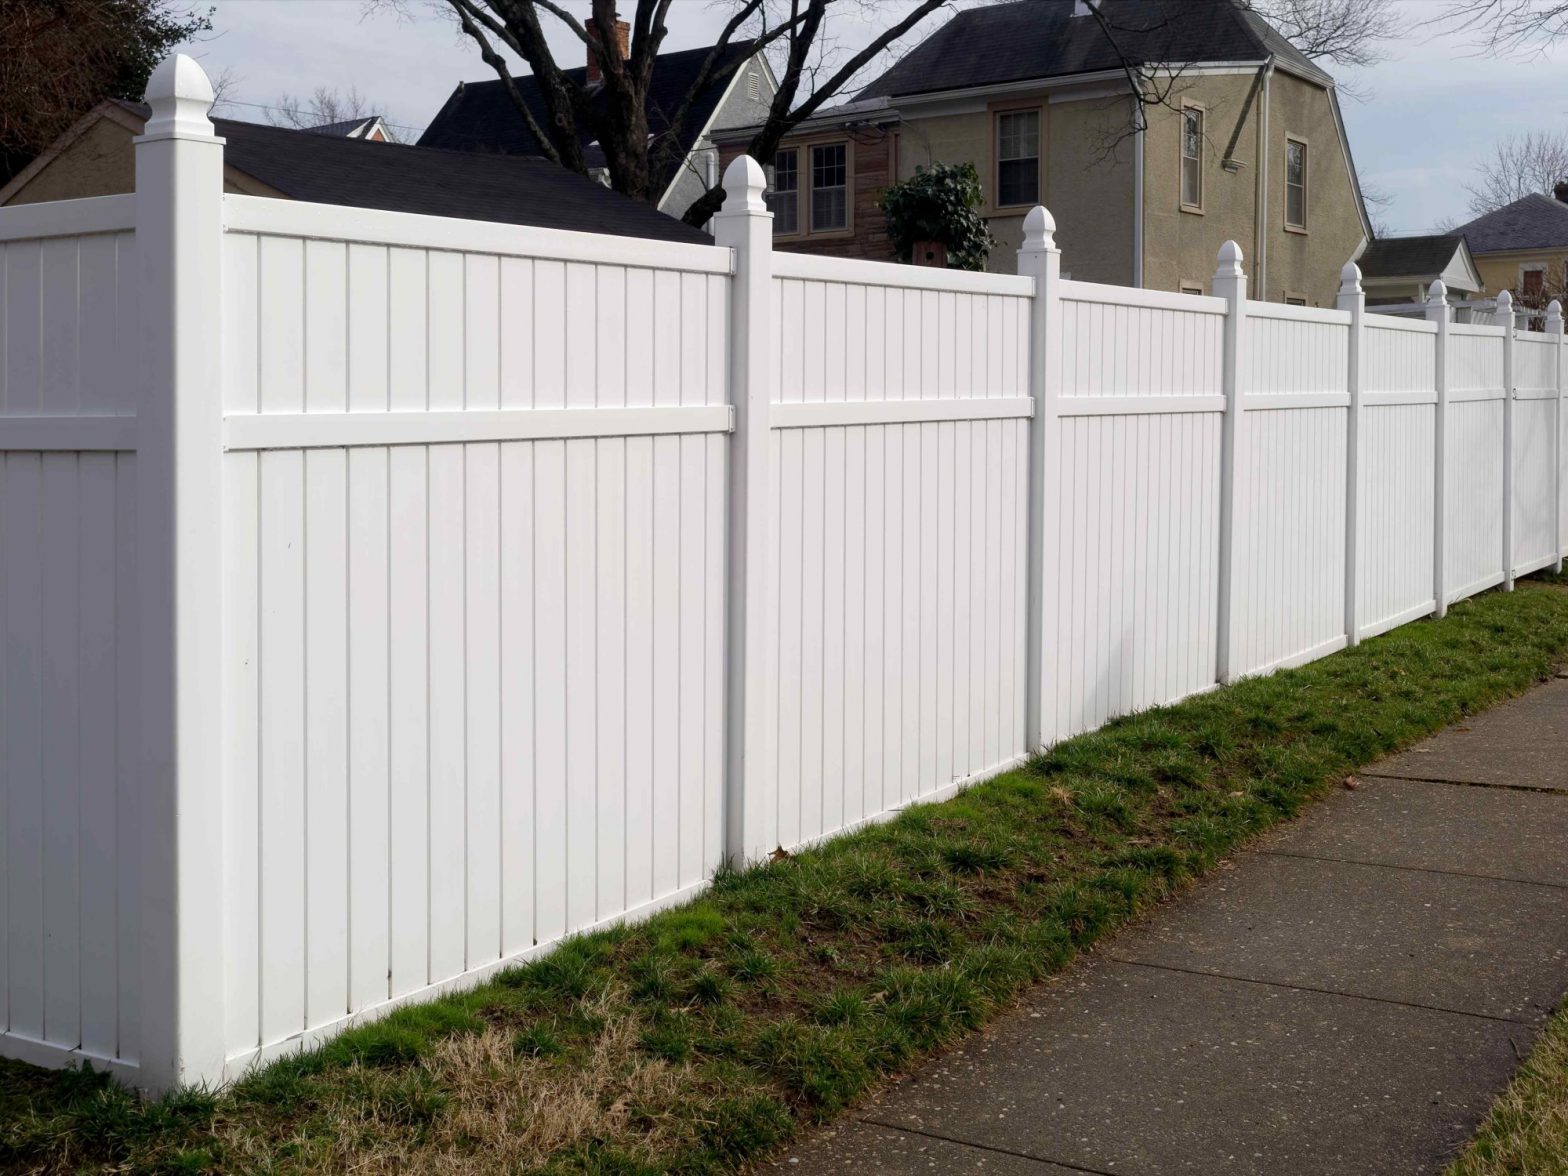 Photo of a Georgia residential fence